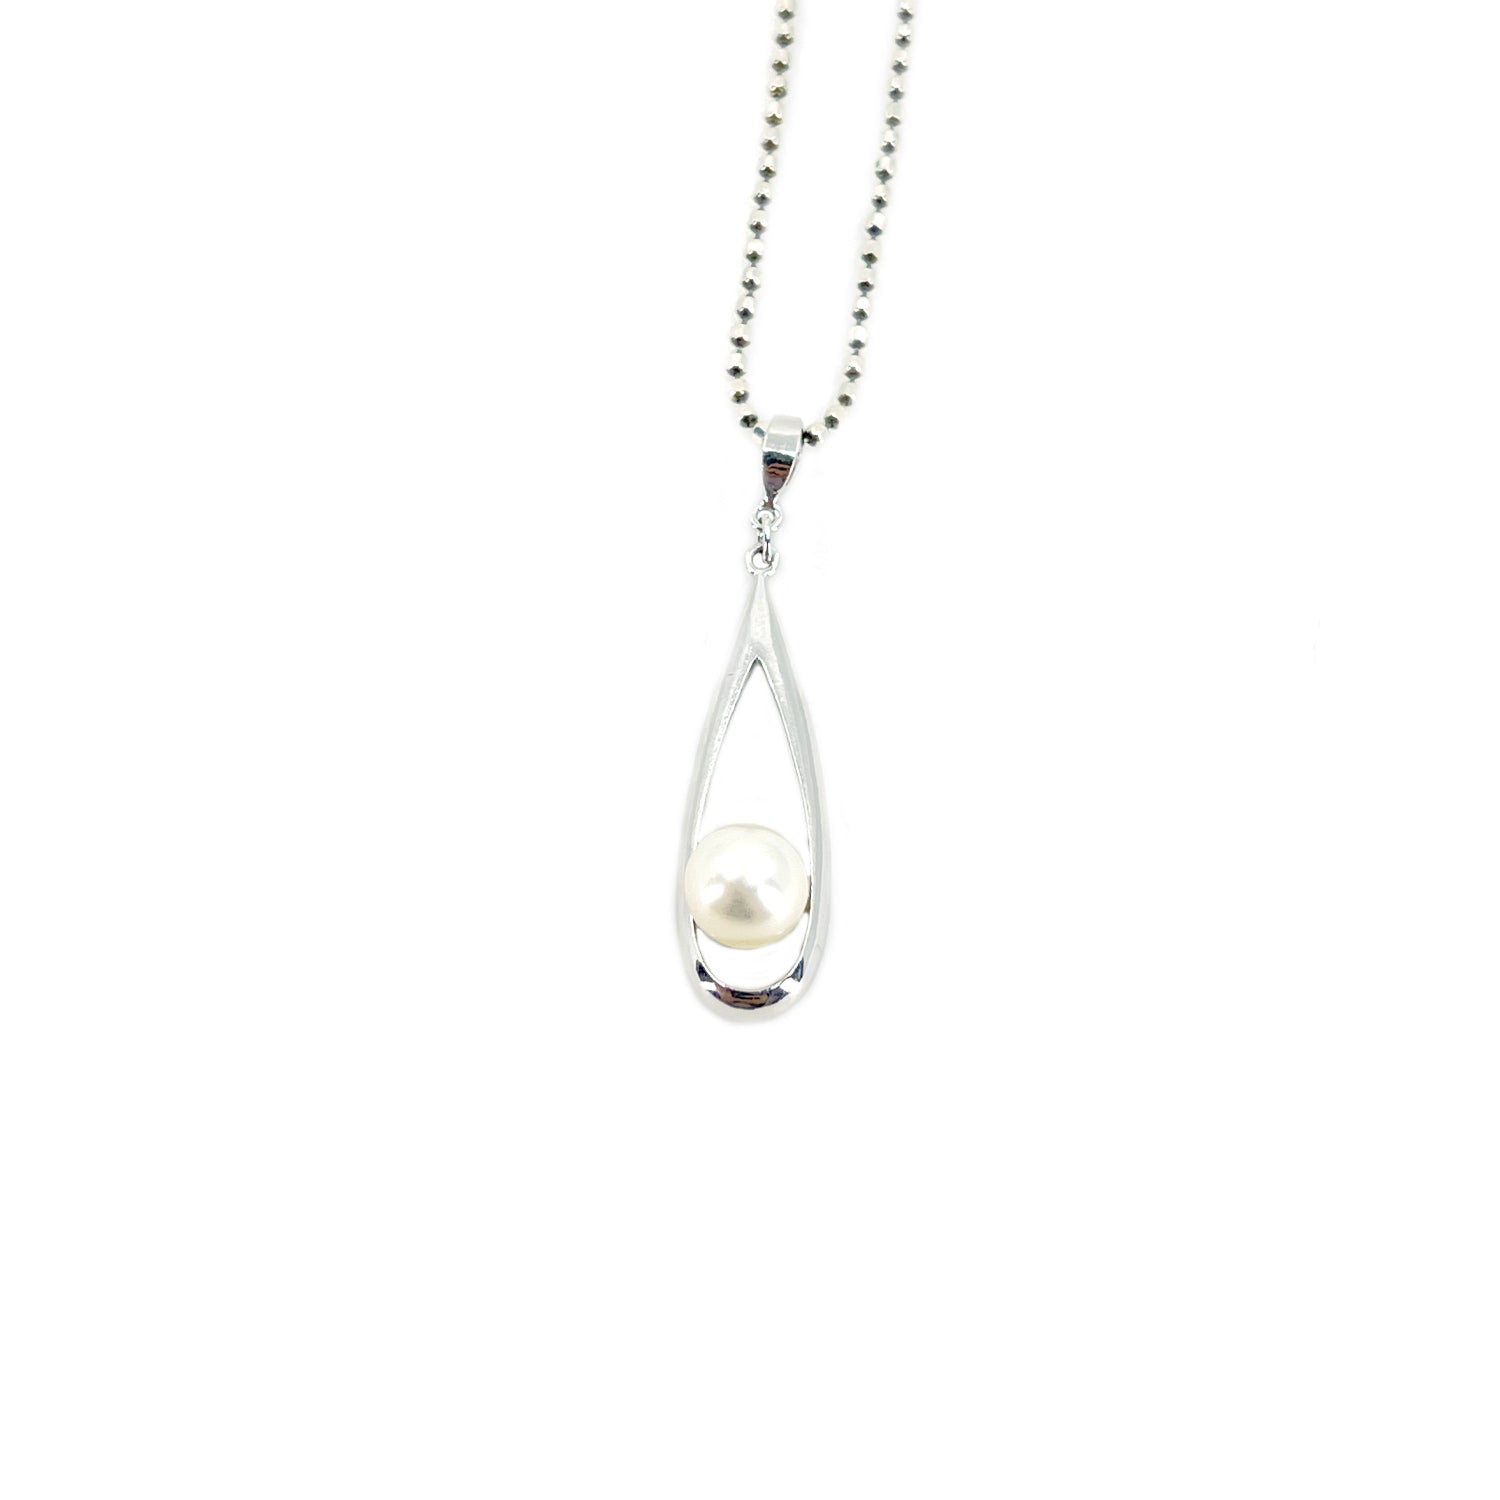 Vintage Mikimoto Drop Saltwater Akoya Cultured Pearl Pendant- Sterling Silver